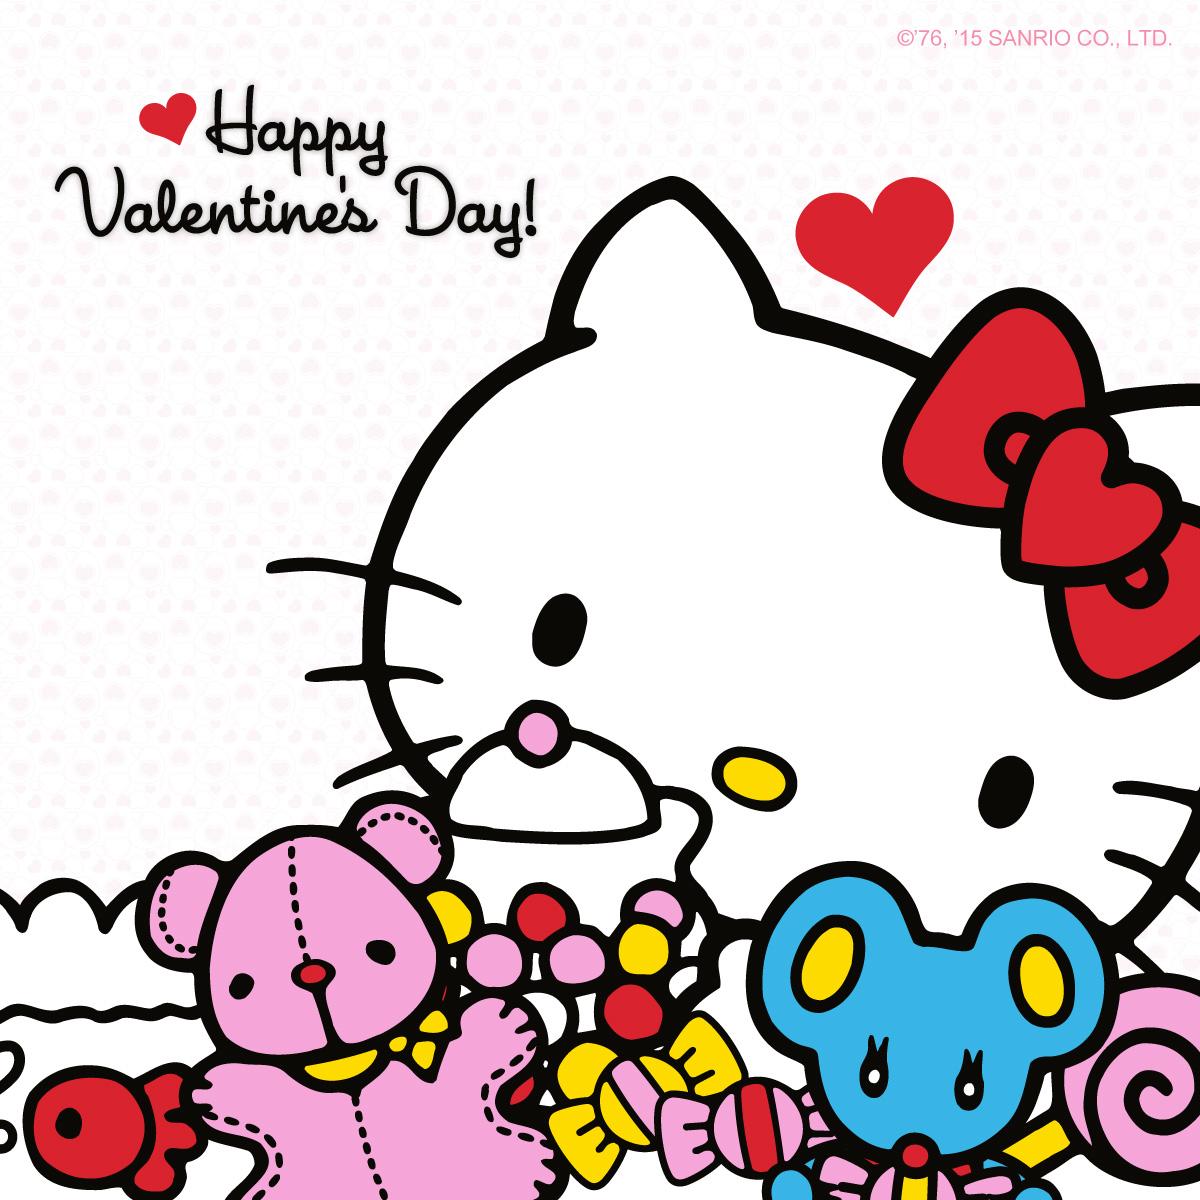 Hello Kitty - #ValentinesDay is a perfect time for sharing friendship and happiness with everyone you love!